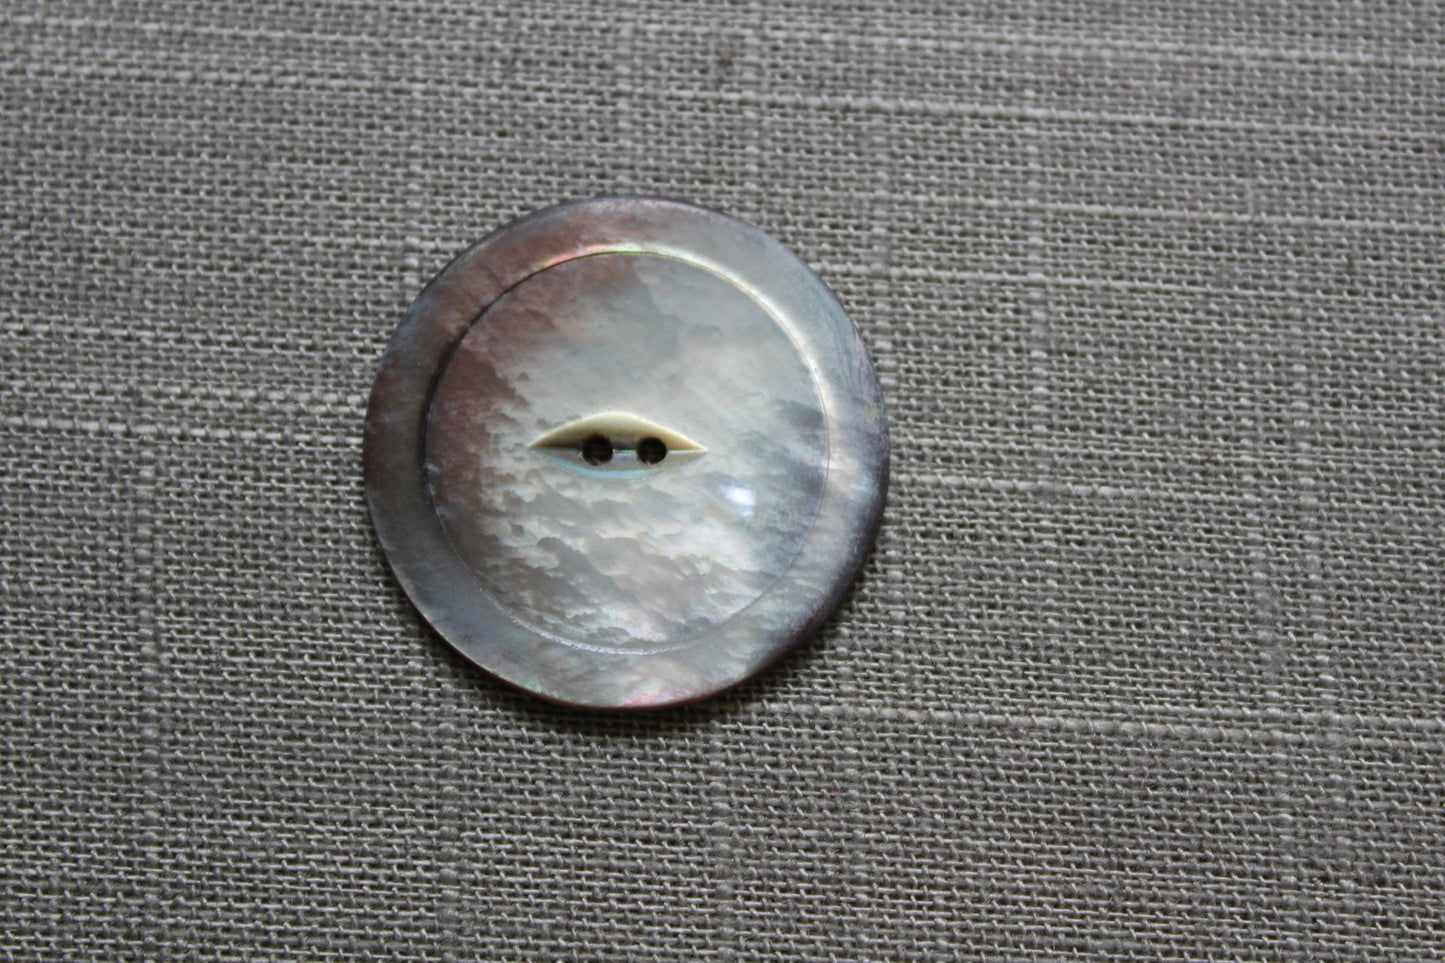 Vintage Real Pearl Buttons 1 7/16" Matching Pair Iridescent Colorful fisheye